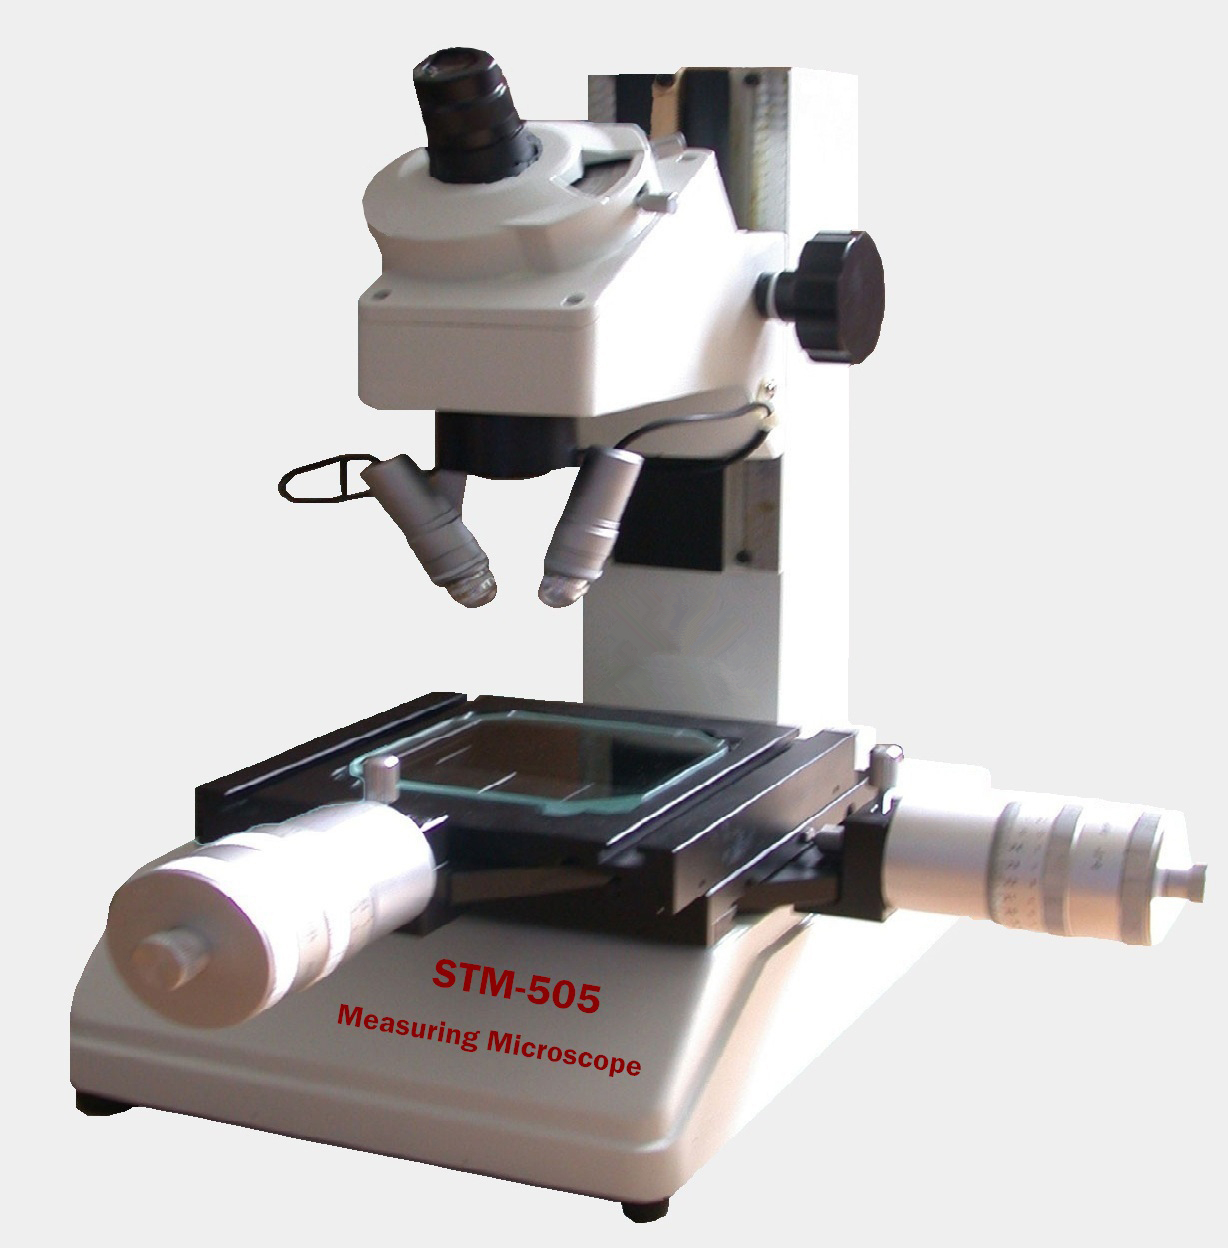 Tool-Makers Microscopes STM-505 